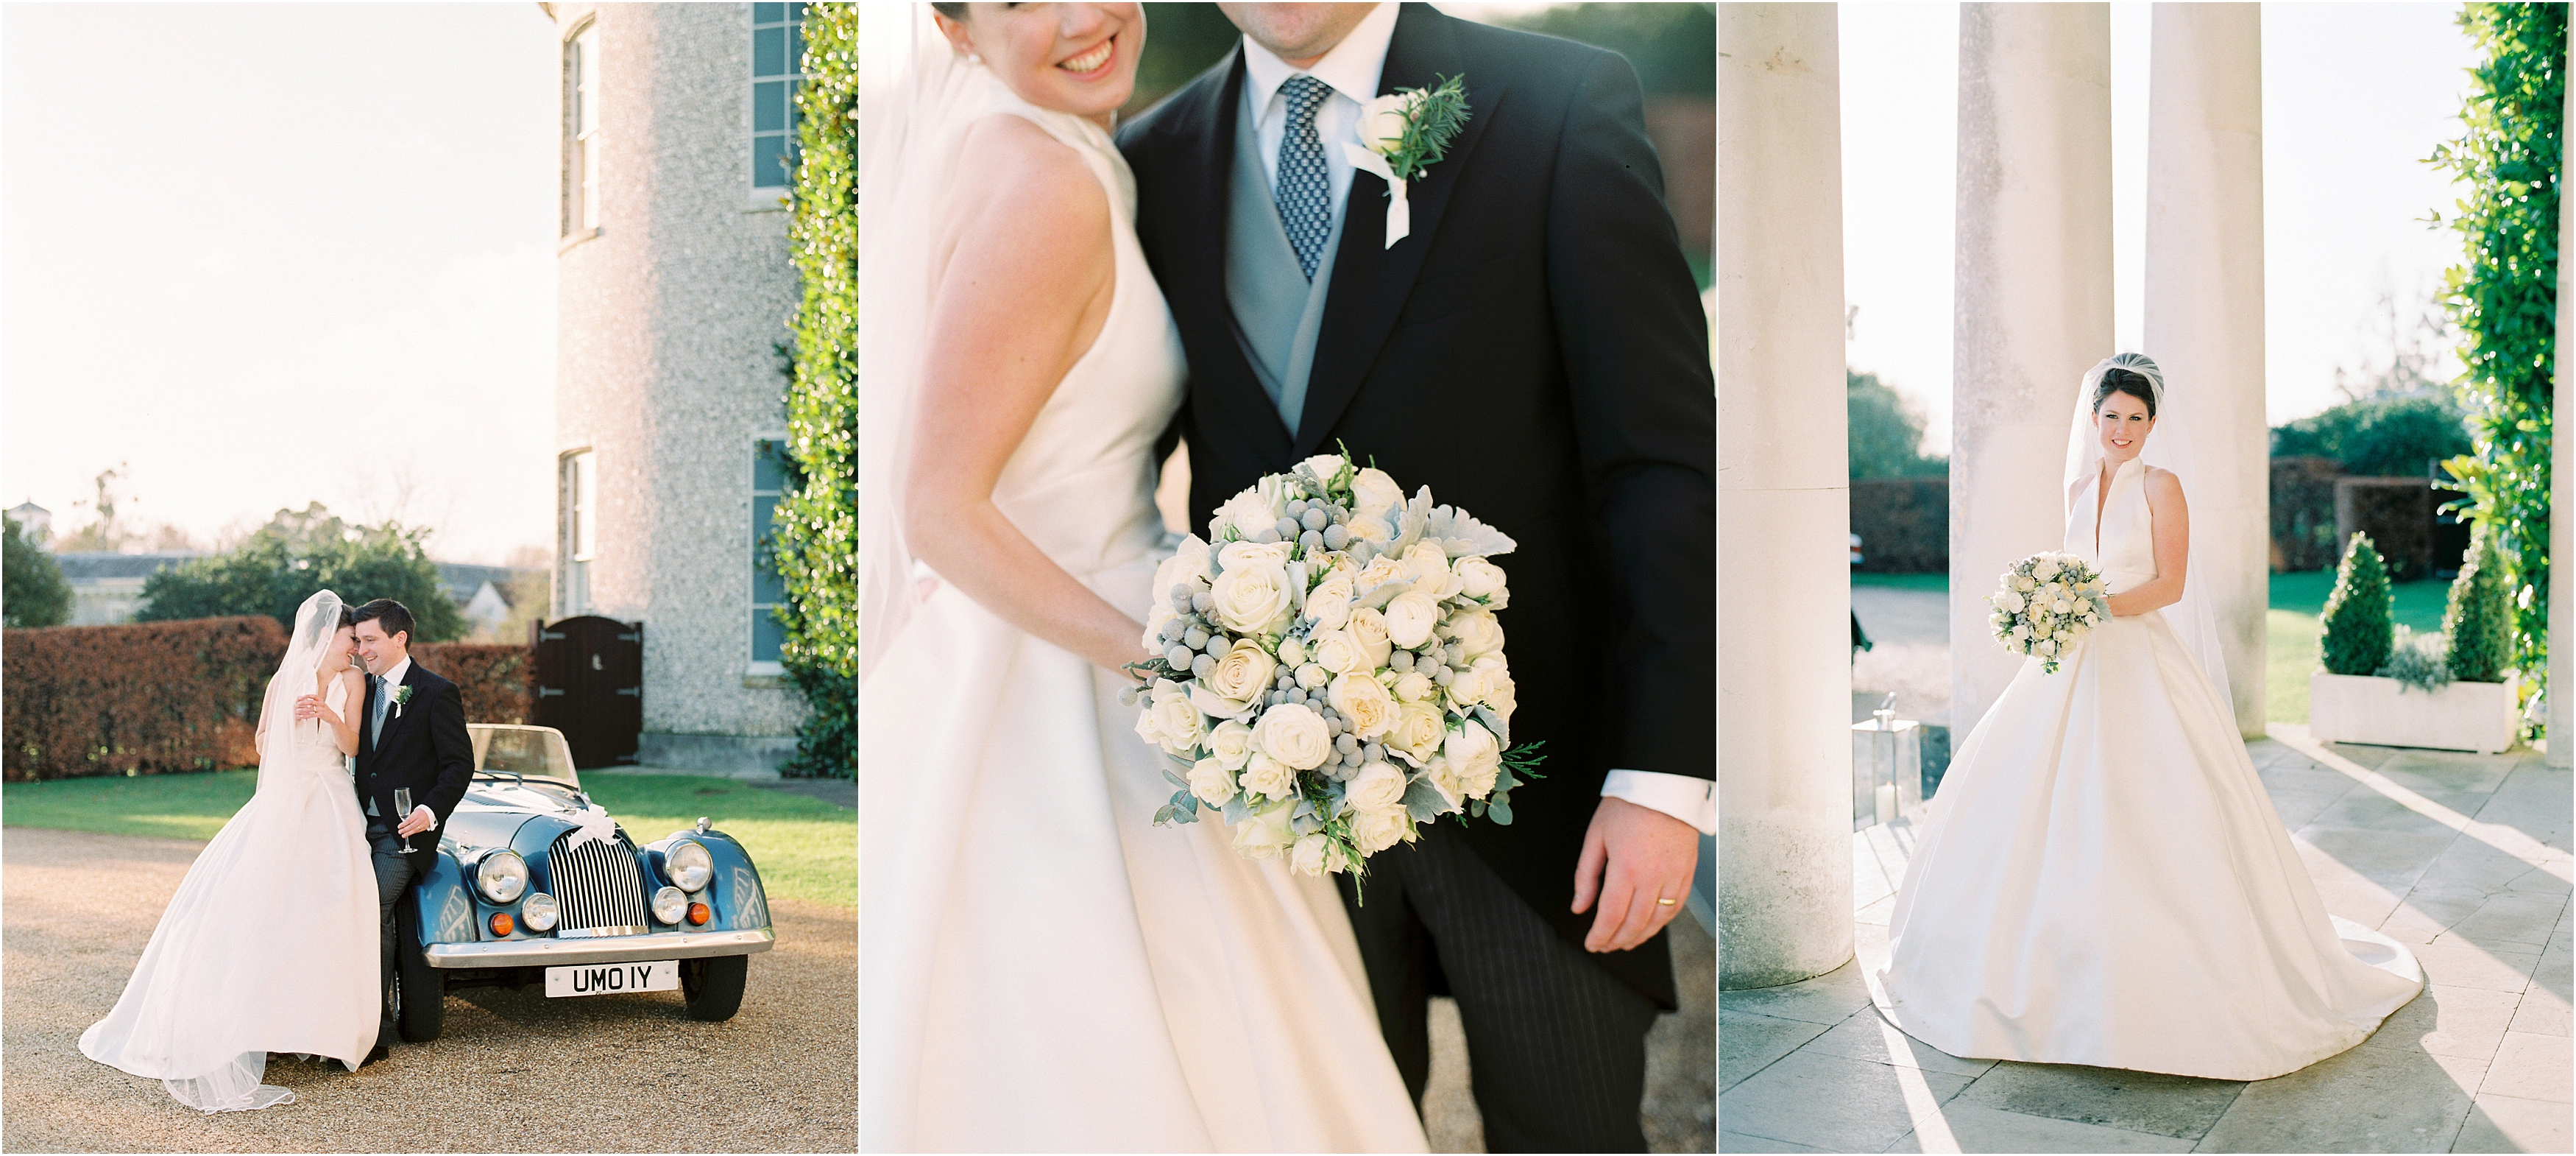 Bride and groom at Goodwood House